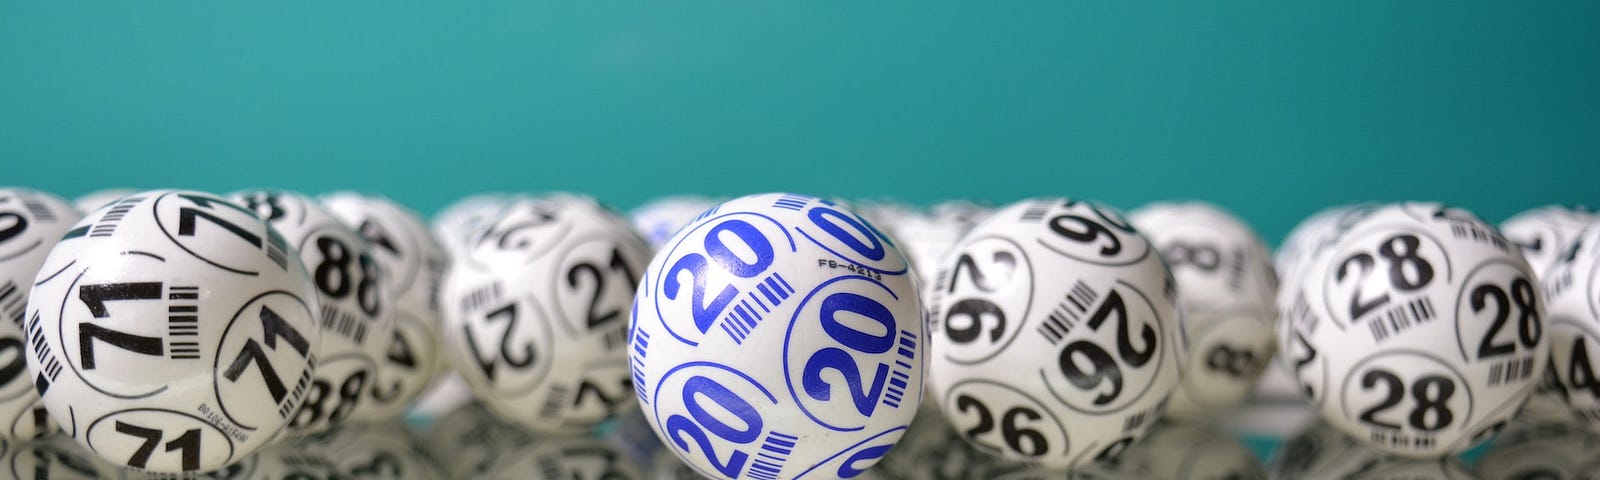 Lottery balls on a teal background